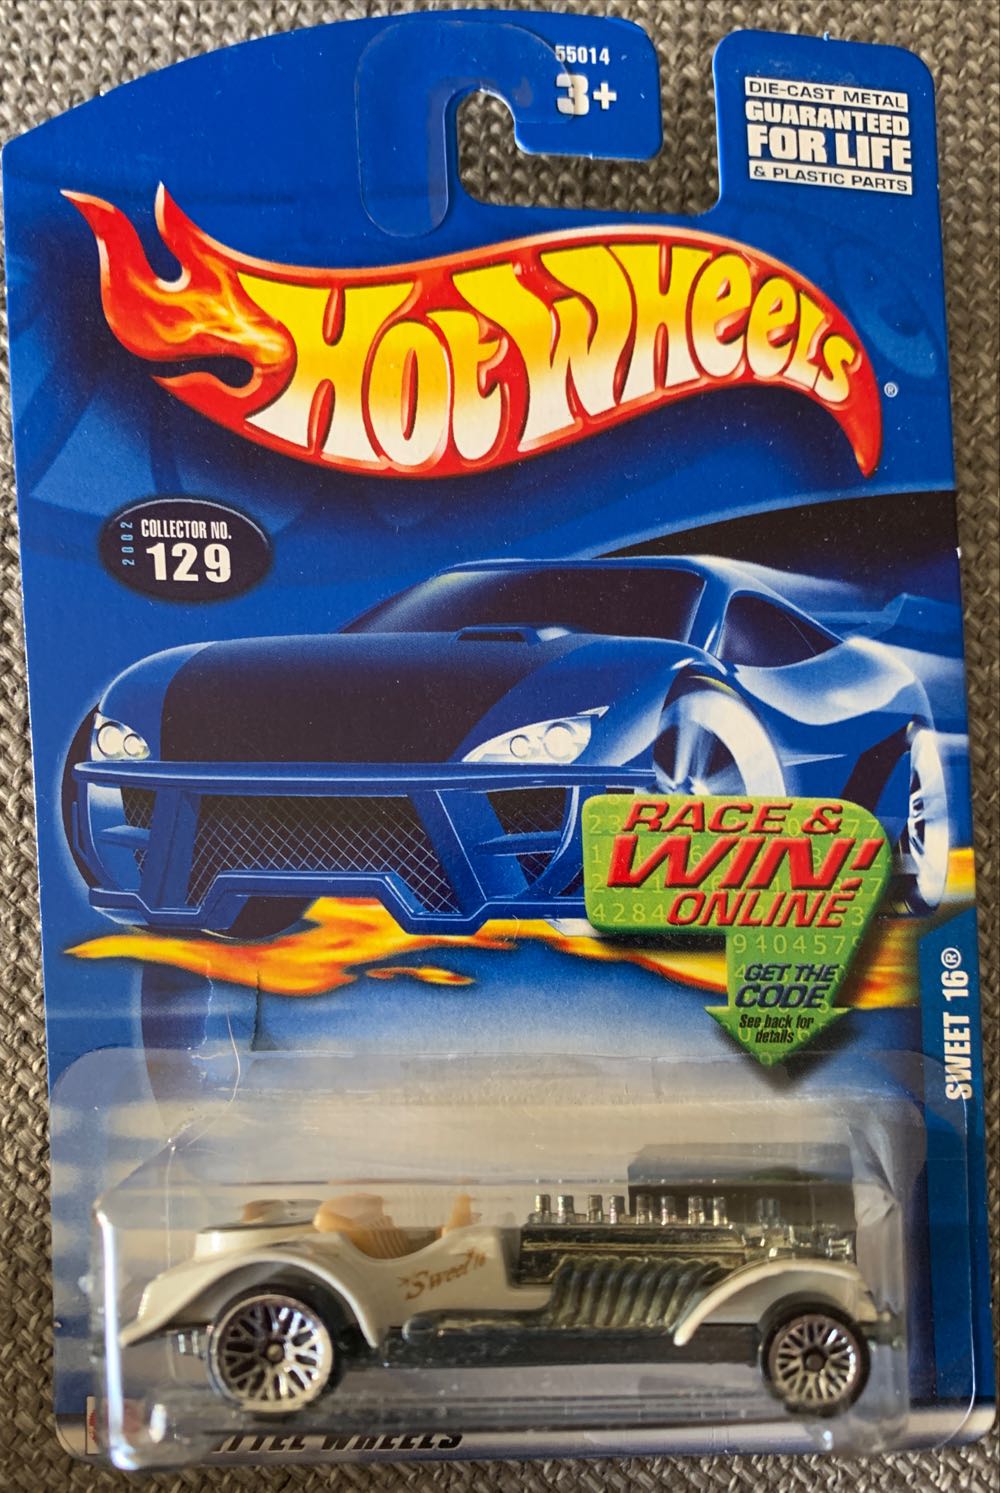 Sweet 16 - Chuck E. Cheese Special Edition toy car collectible - Main Image 2